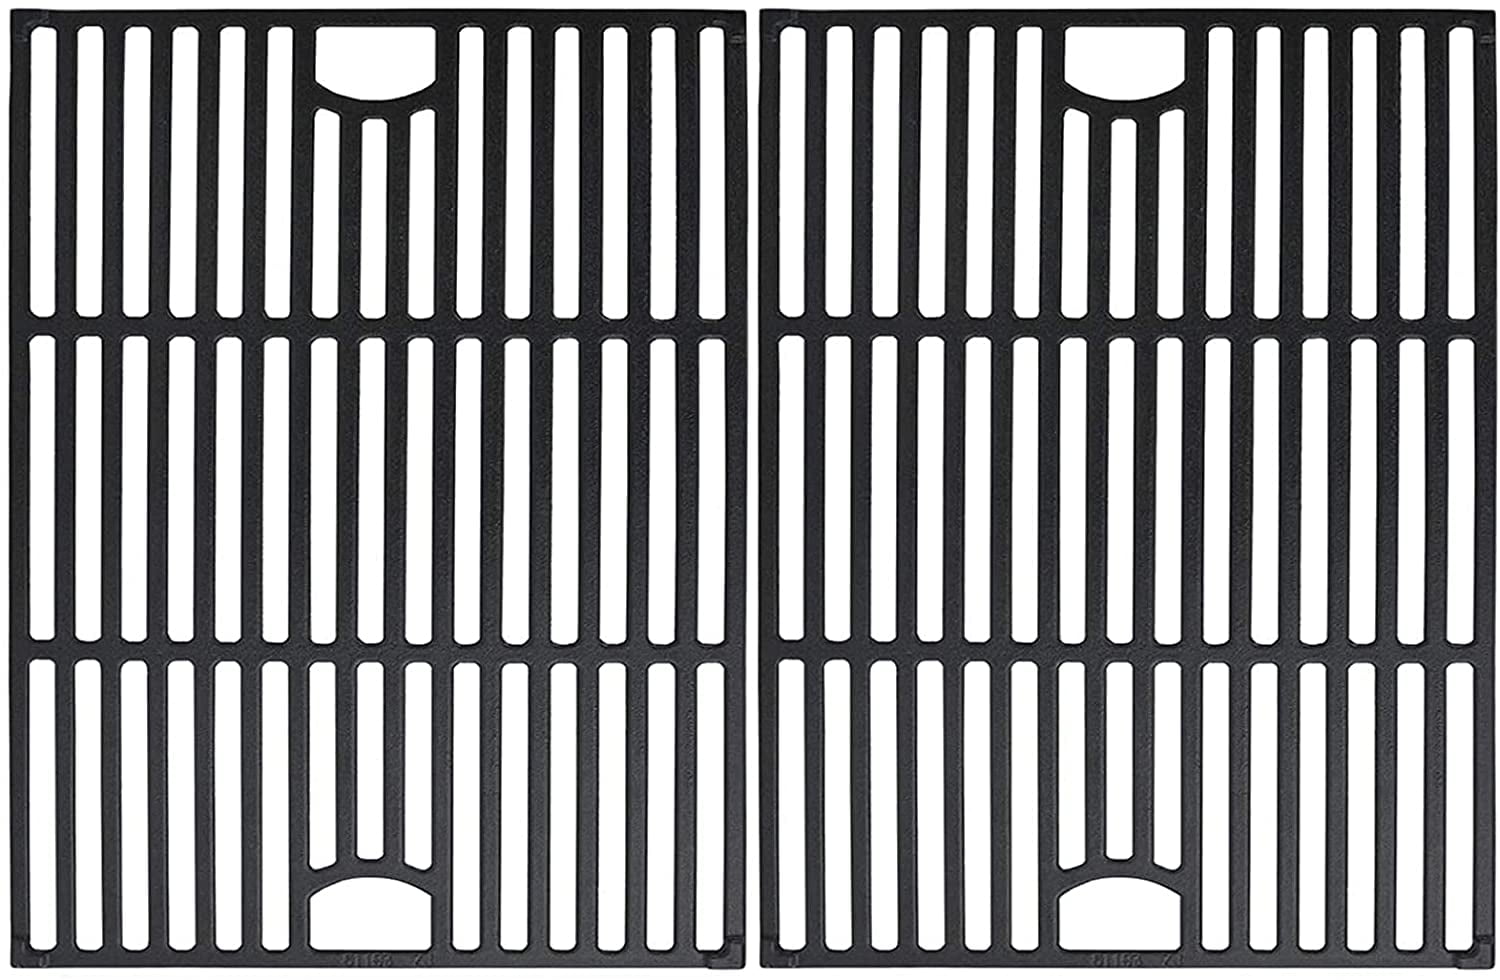 Nexgrill Cast Iron Cooking Grate Grill Barbecue BBQ Grid 9 X 17 Inch for sale online 